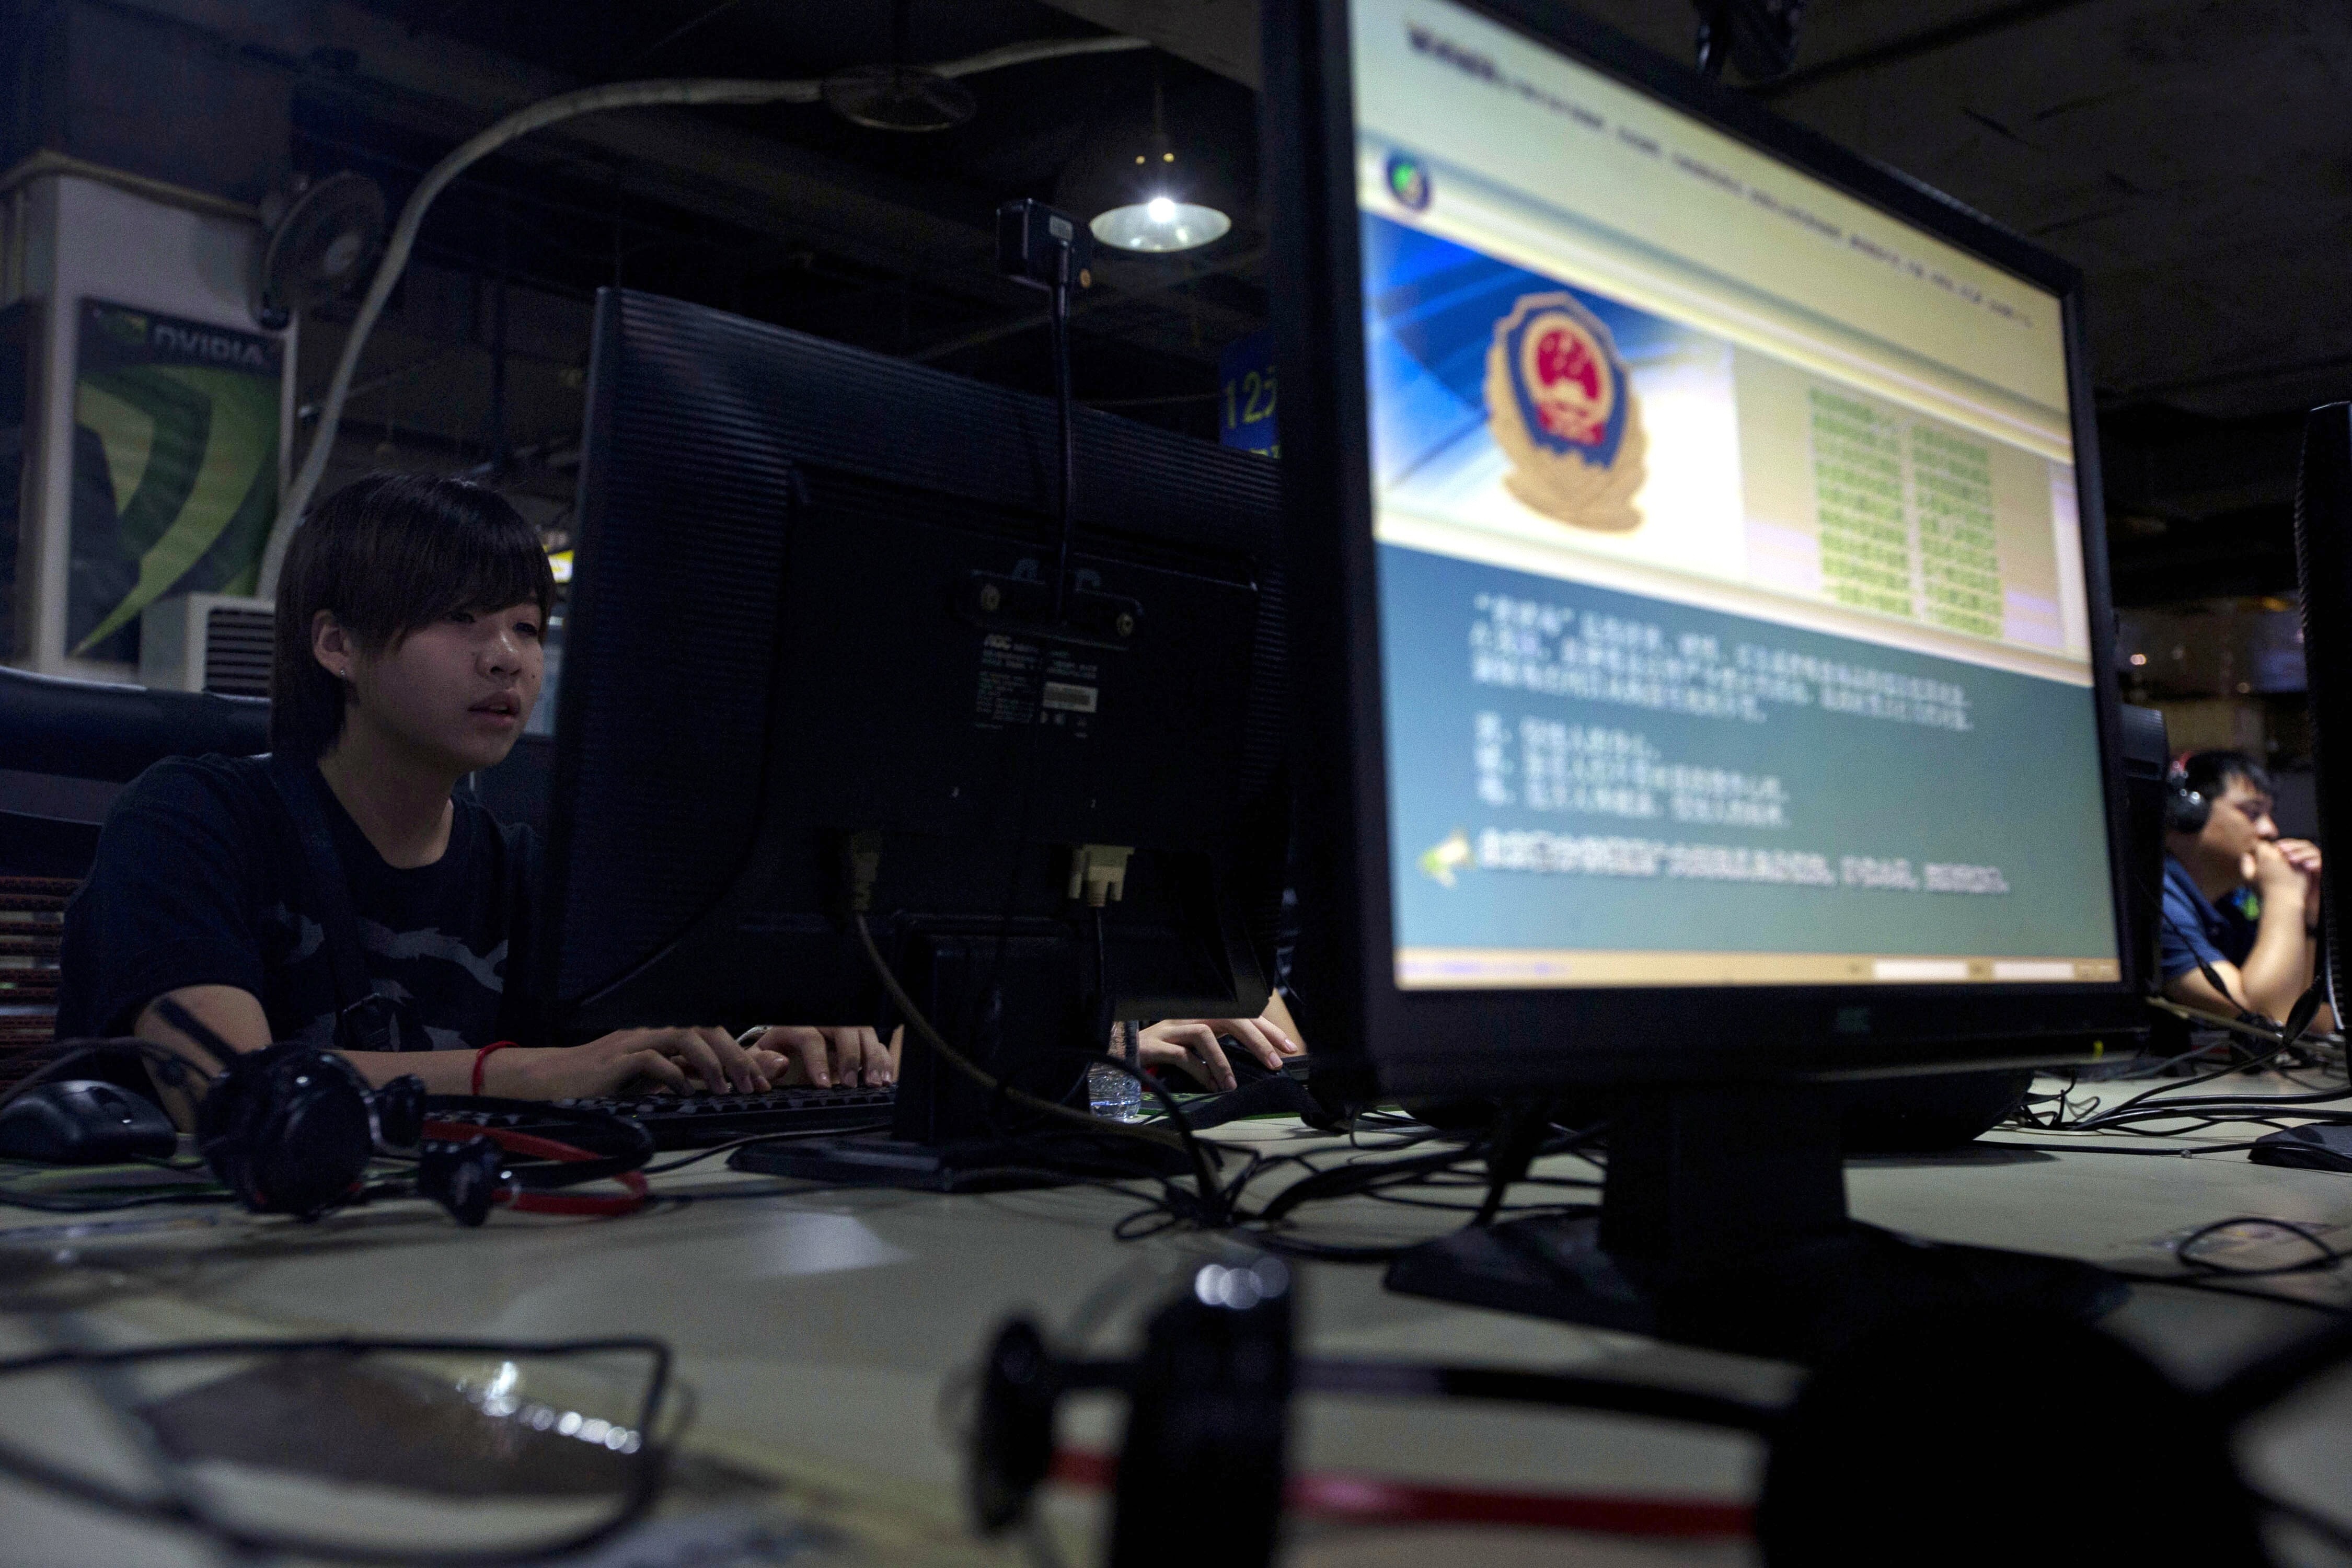 Computer users sit near a monitor display with a message from the Chinese police on the proper use of the internet at an internet cafe in Beijing. Photo: AP